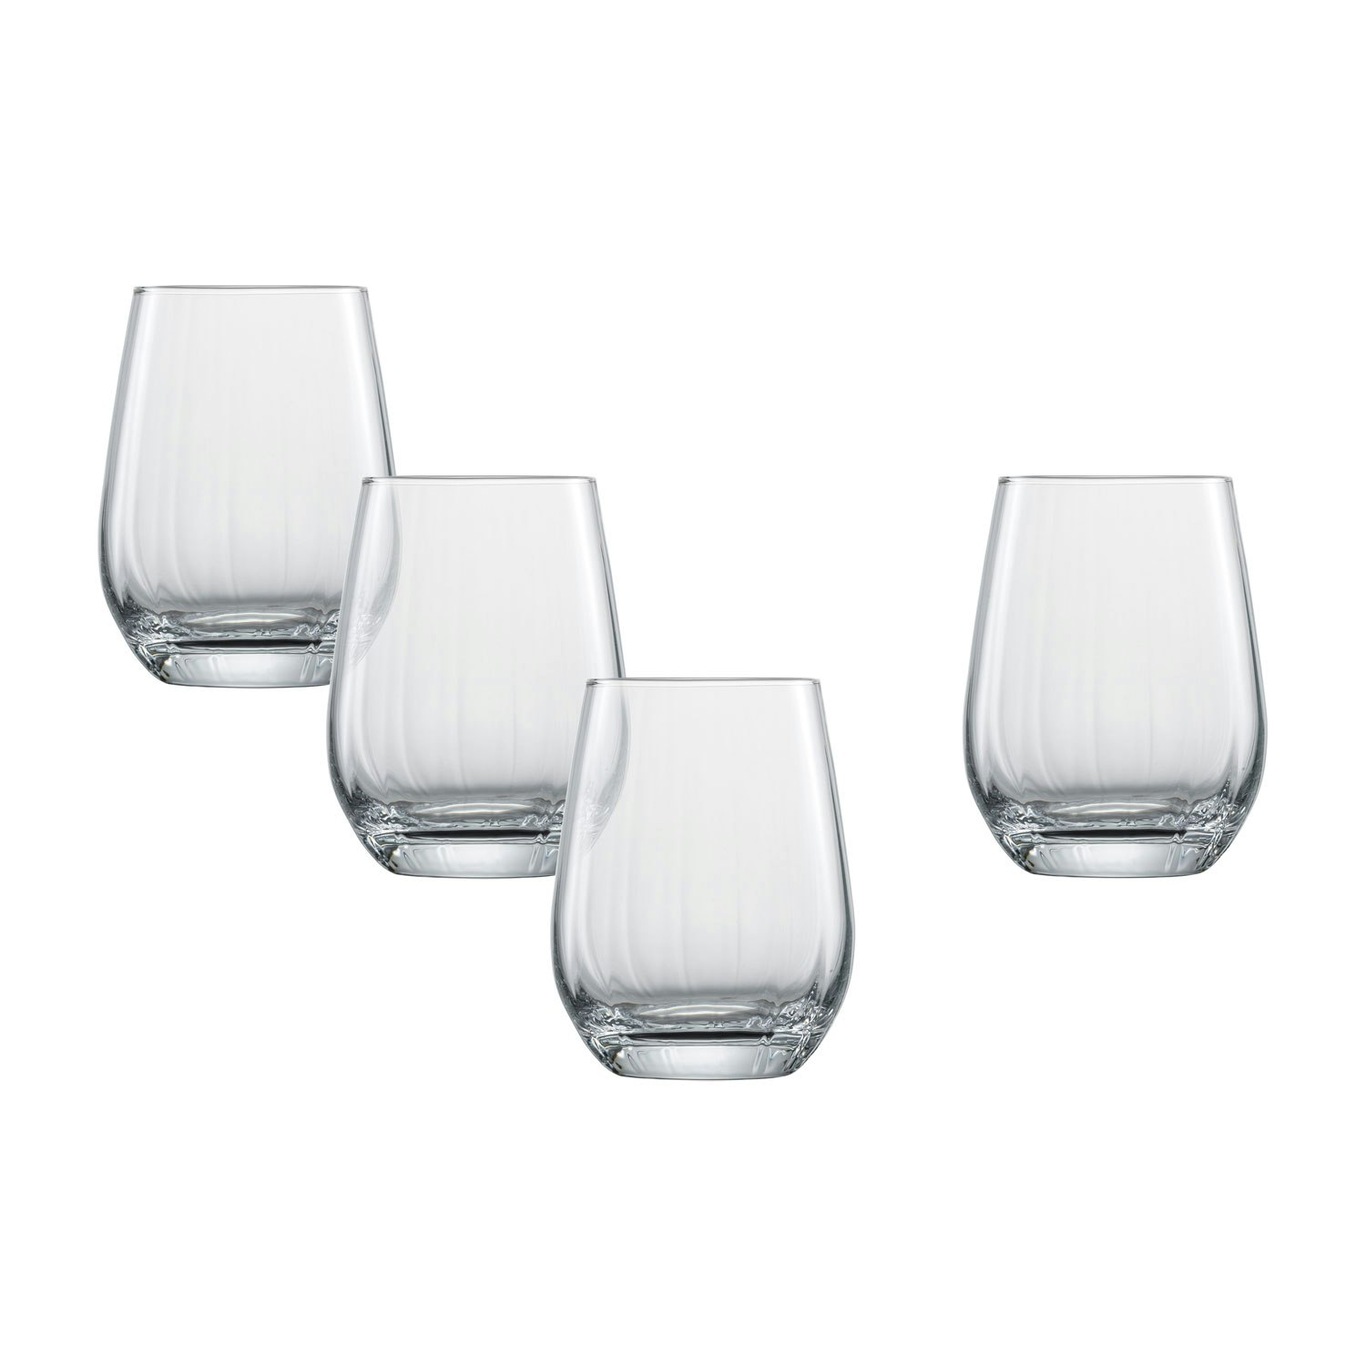 https://royaldesign.com/image/2/zwiesel-prizma-water-glass-37-cl-4-pack-0?w=800&quality=80